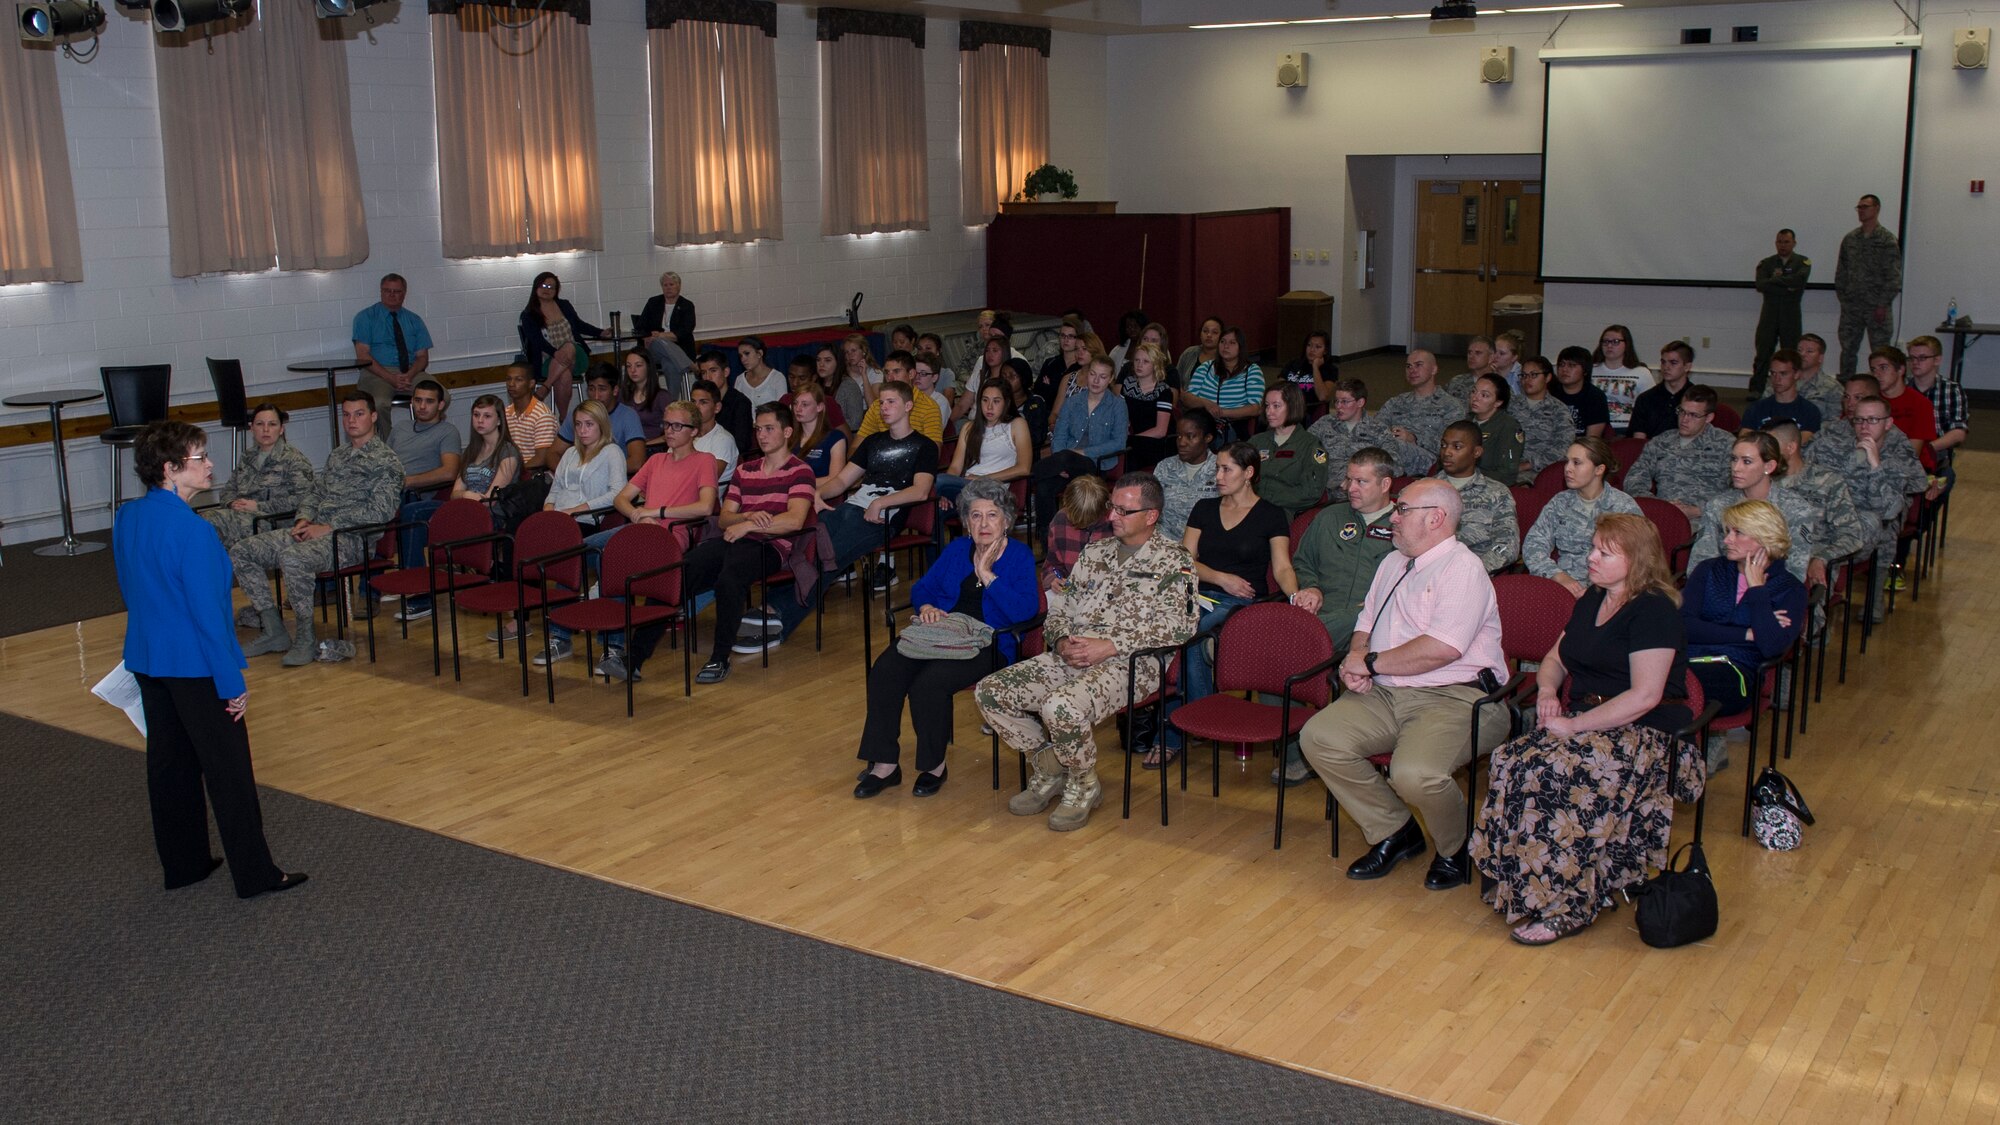 Dr. Gail Wallen, founder and director of the military Holocaust educational program, delivers an informational speech about the Holocaust at Holloman Air Force Base, N.M., April 21, 2015. Wallen and her guests, Theresa Dulgov and Lily Brull, both Holocaust survivors, spent the day providing information and telling personal experiences about the Holocaust to military members and advanced placement students from Alamogordo High School. (U.S. Air Force photo by Airman 1st Class Aaron Montoya / Released)